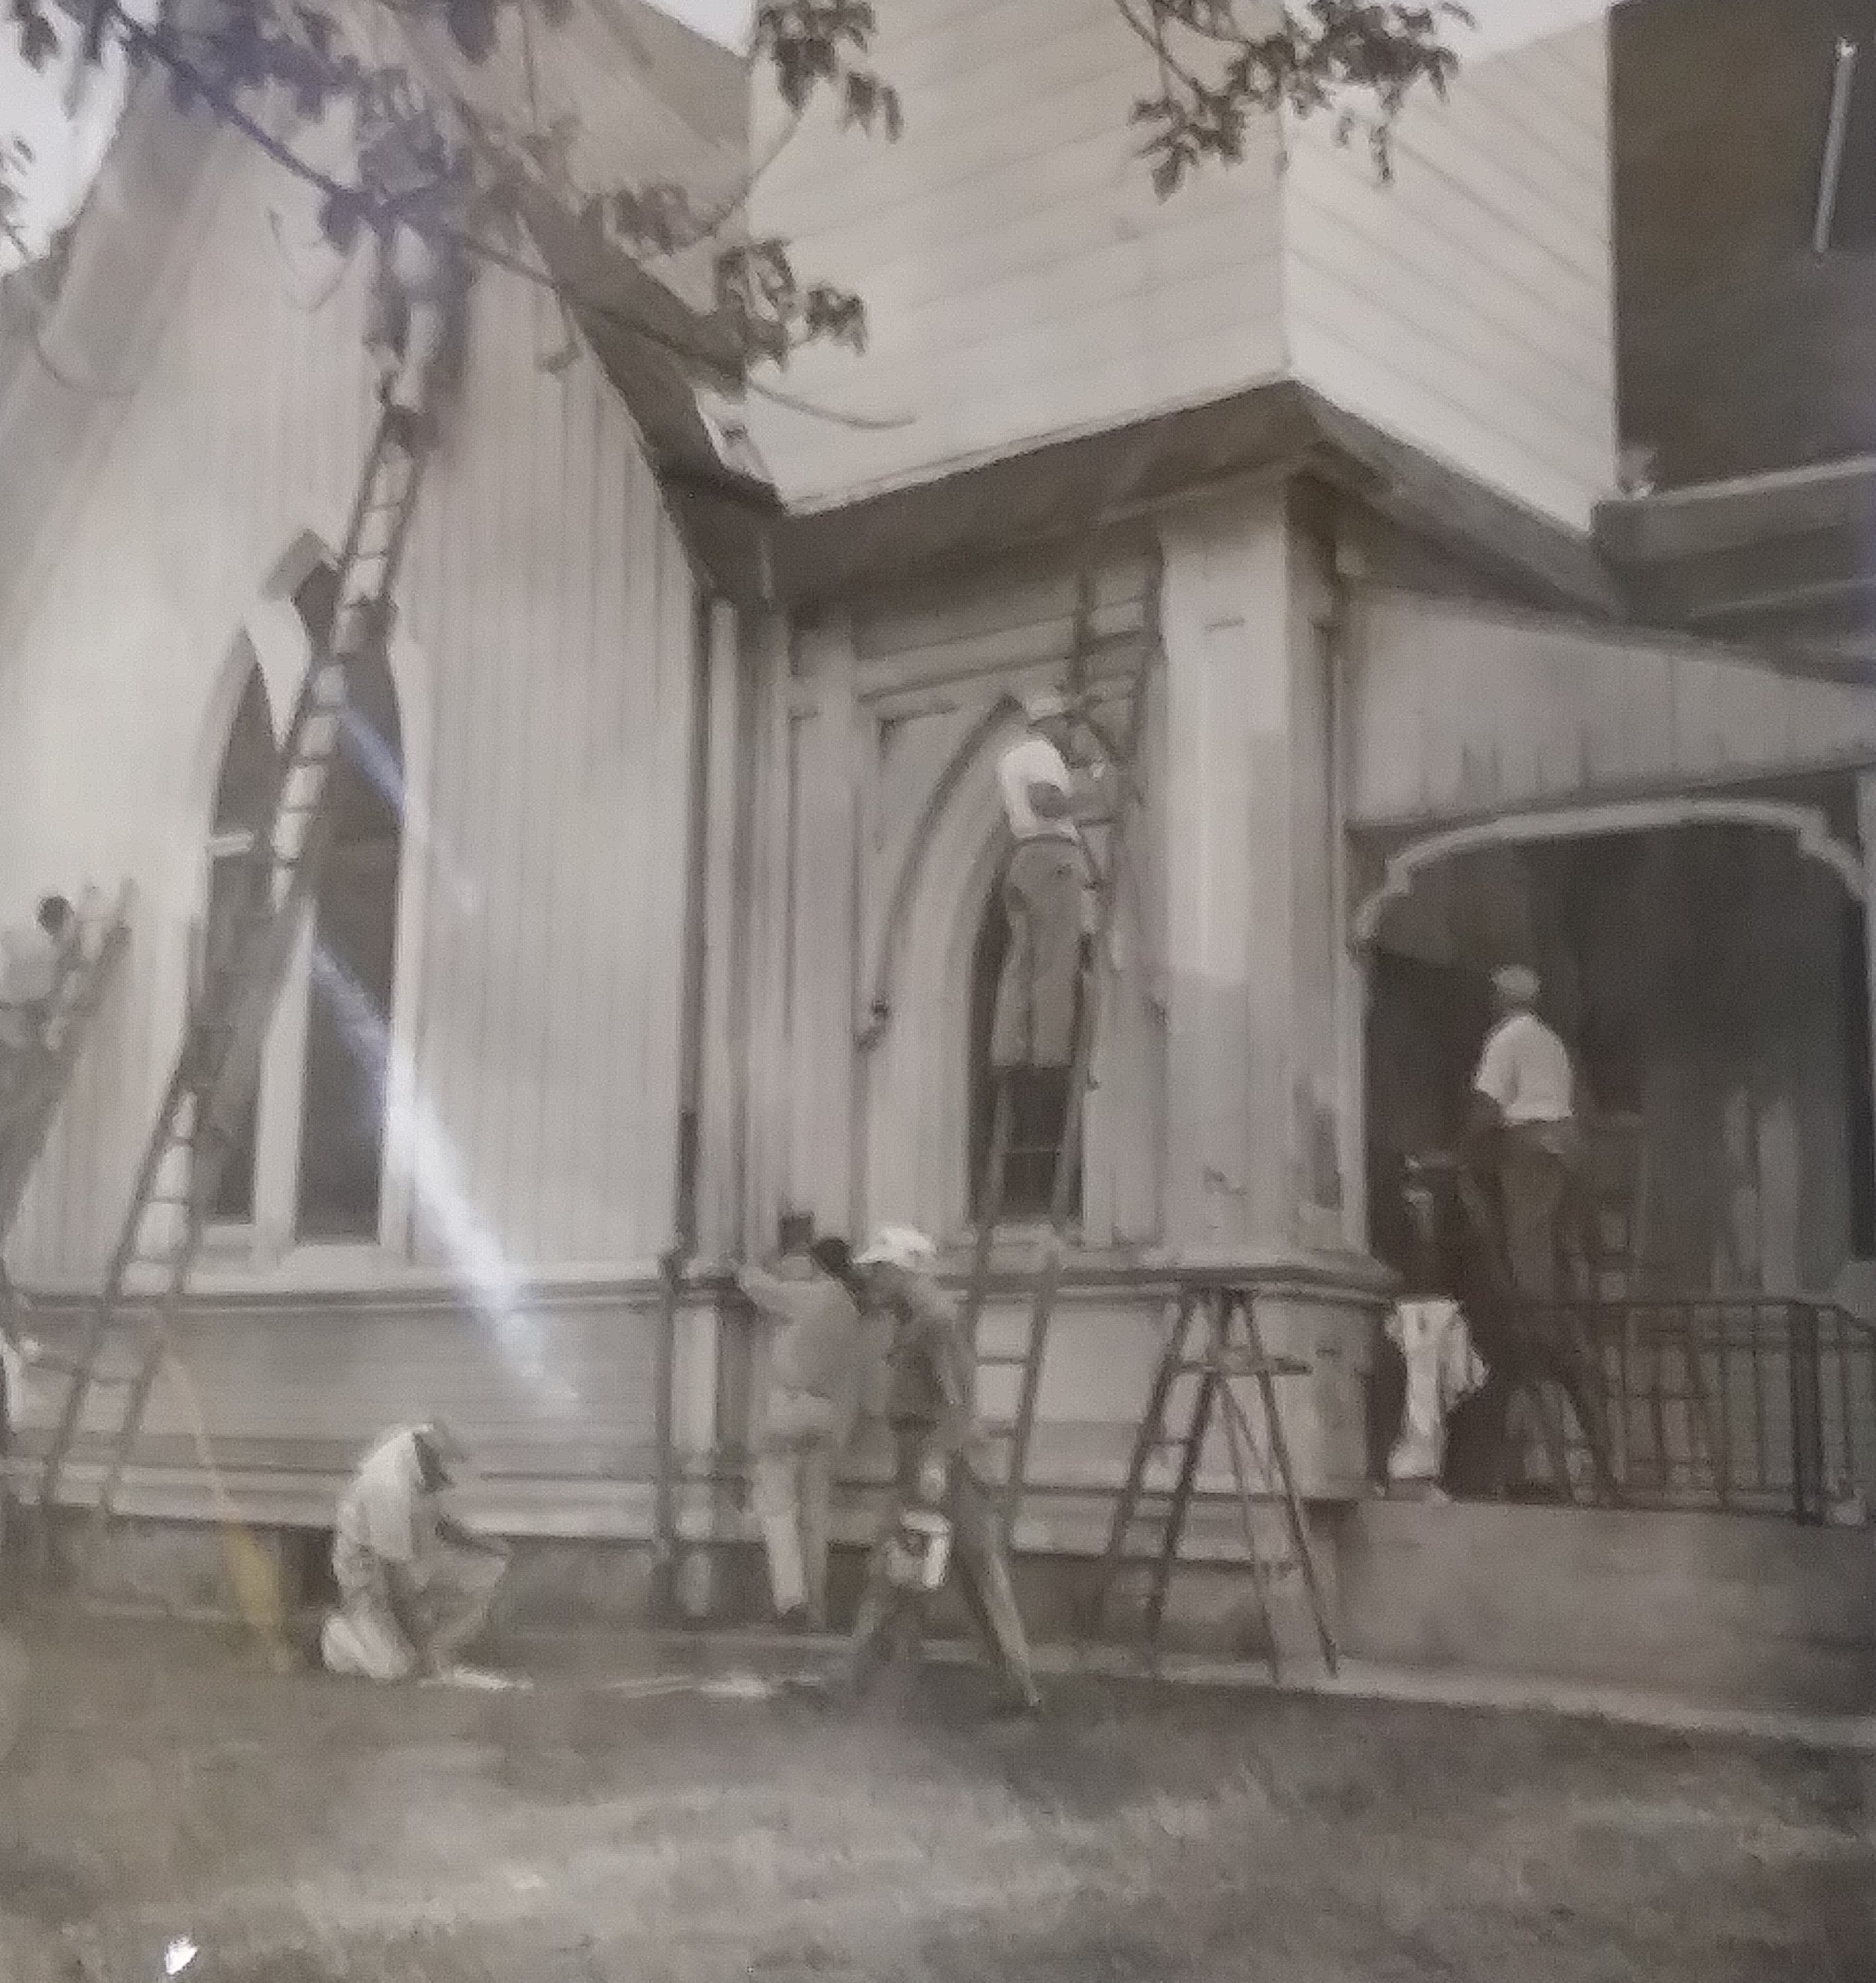  Repair work on the Original Grace Church on Washington Avenue and Elm Street  in Linden .  